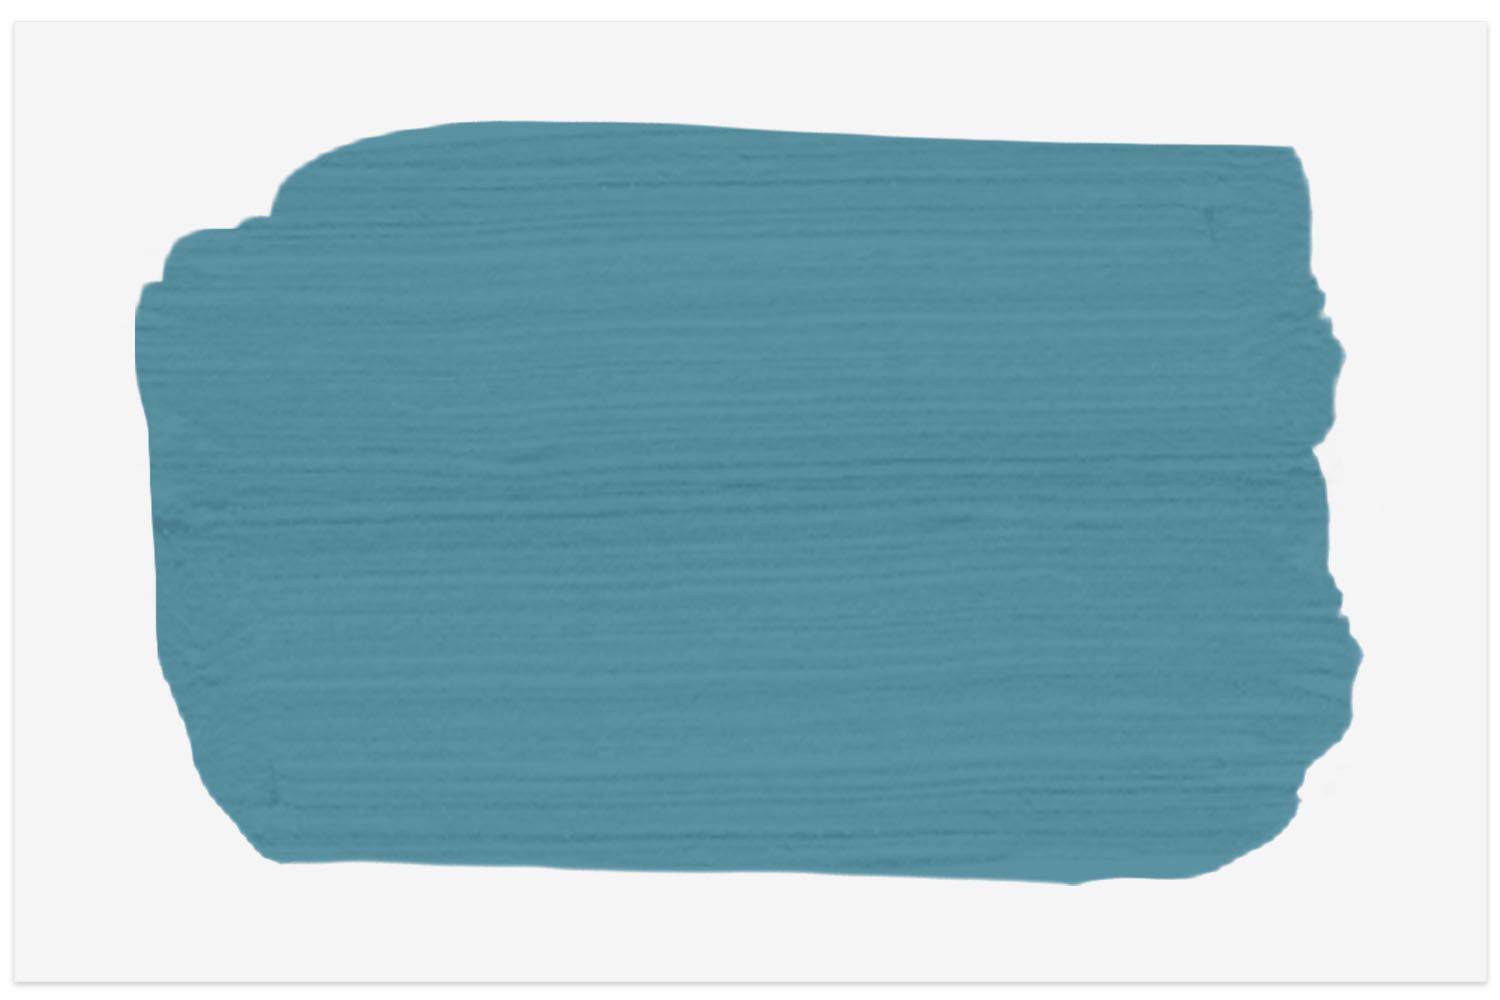 Sherwin-Williams Manitou Blue color swatch.